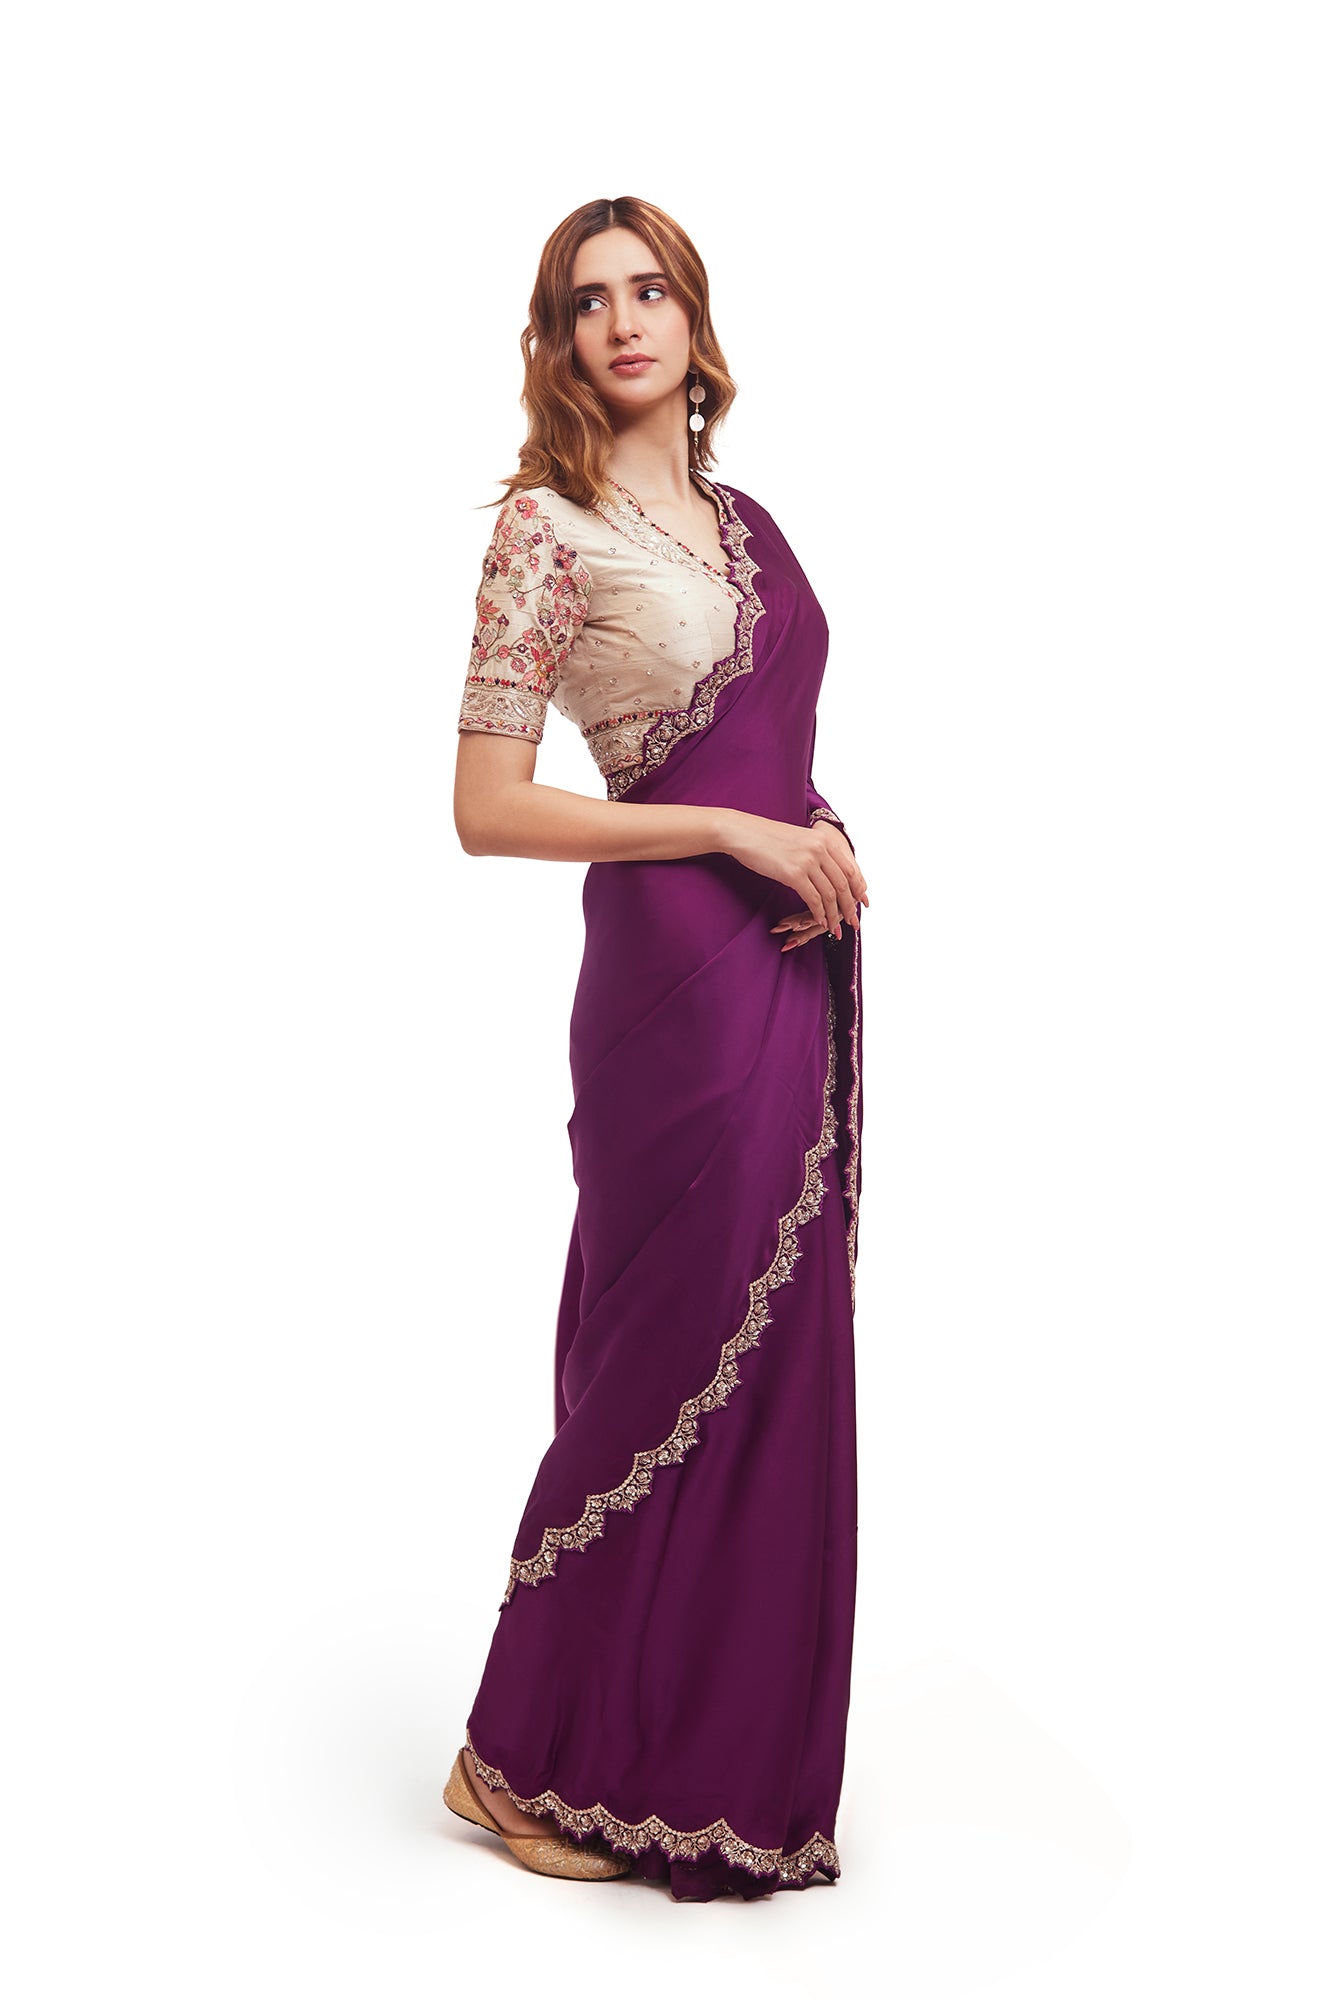 Shop purple organza satin saree online in USA with embroidered saree blouse. Look your best at parties and weddings in beautiful designer sarees, embroidered sarees, handwoven sarees, silk sarees, organza saris from Pure Elegance Indian saree store in USA.-side